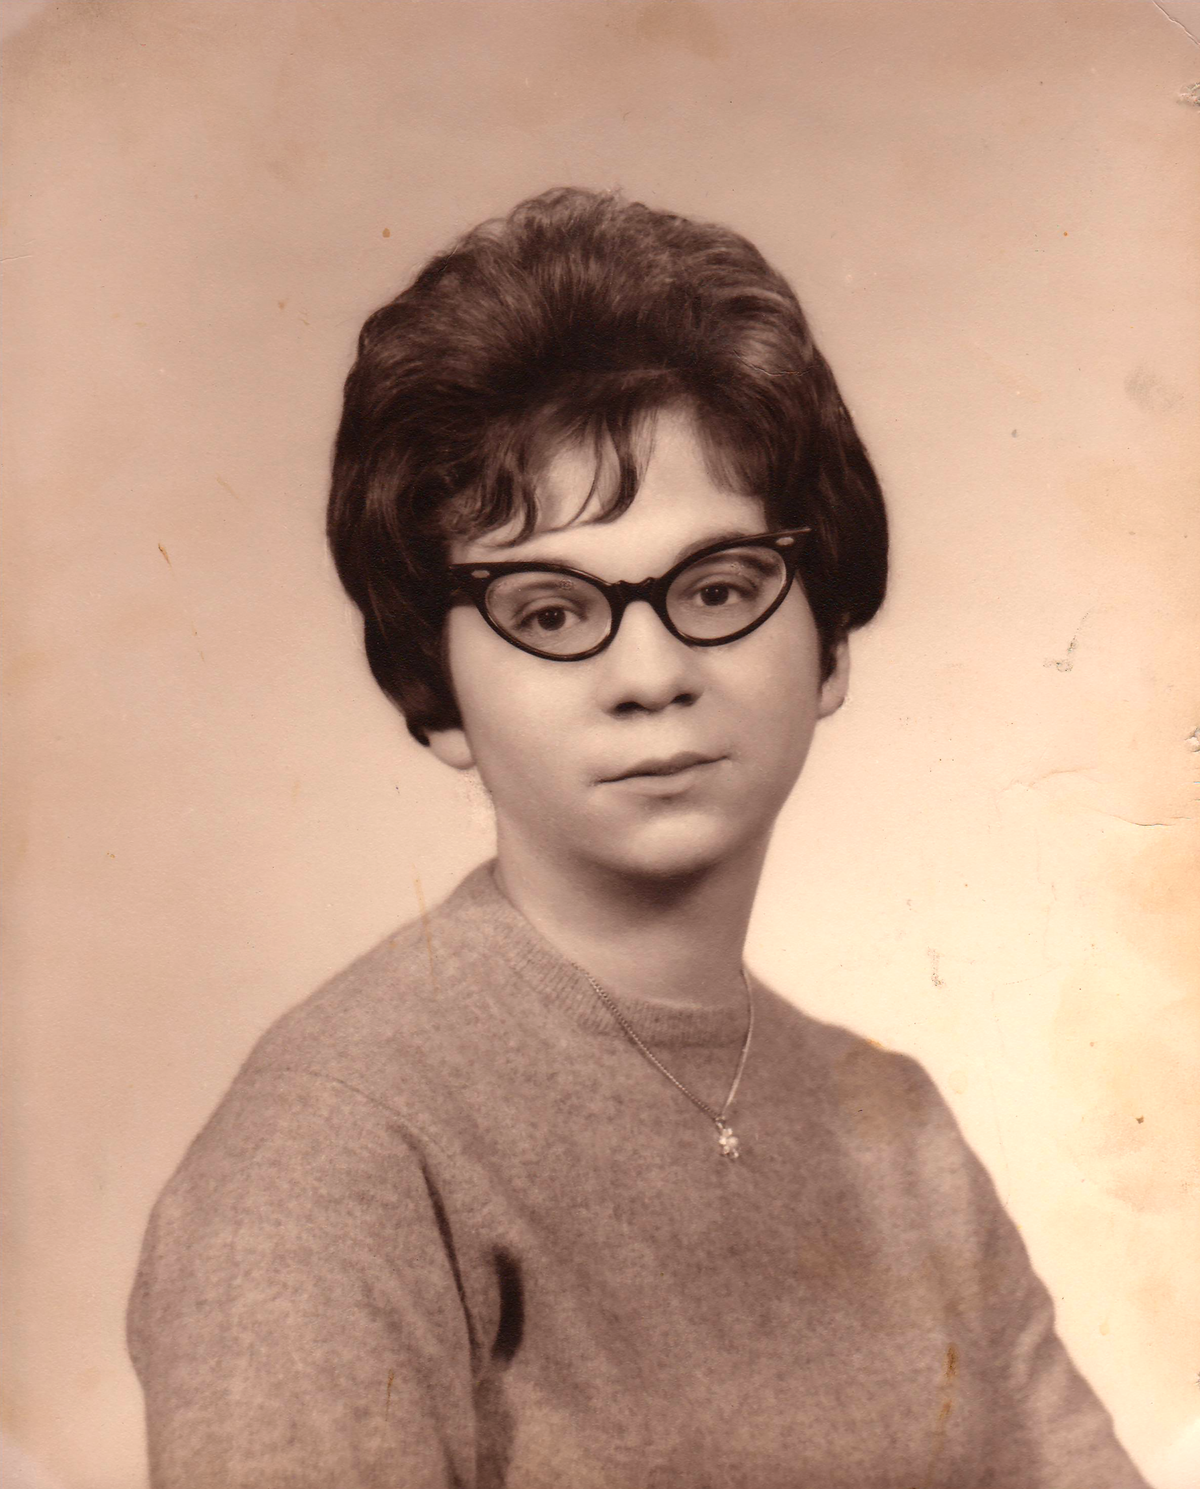 Nancy as a young adult.